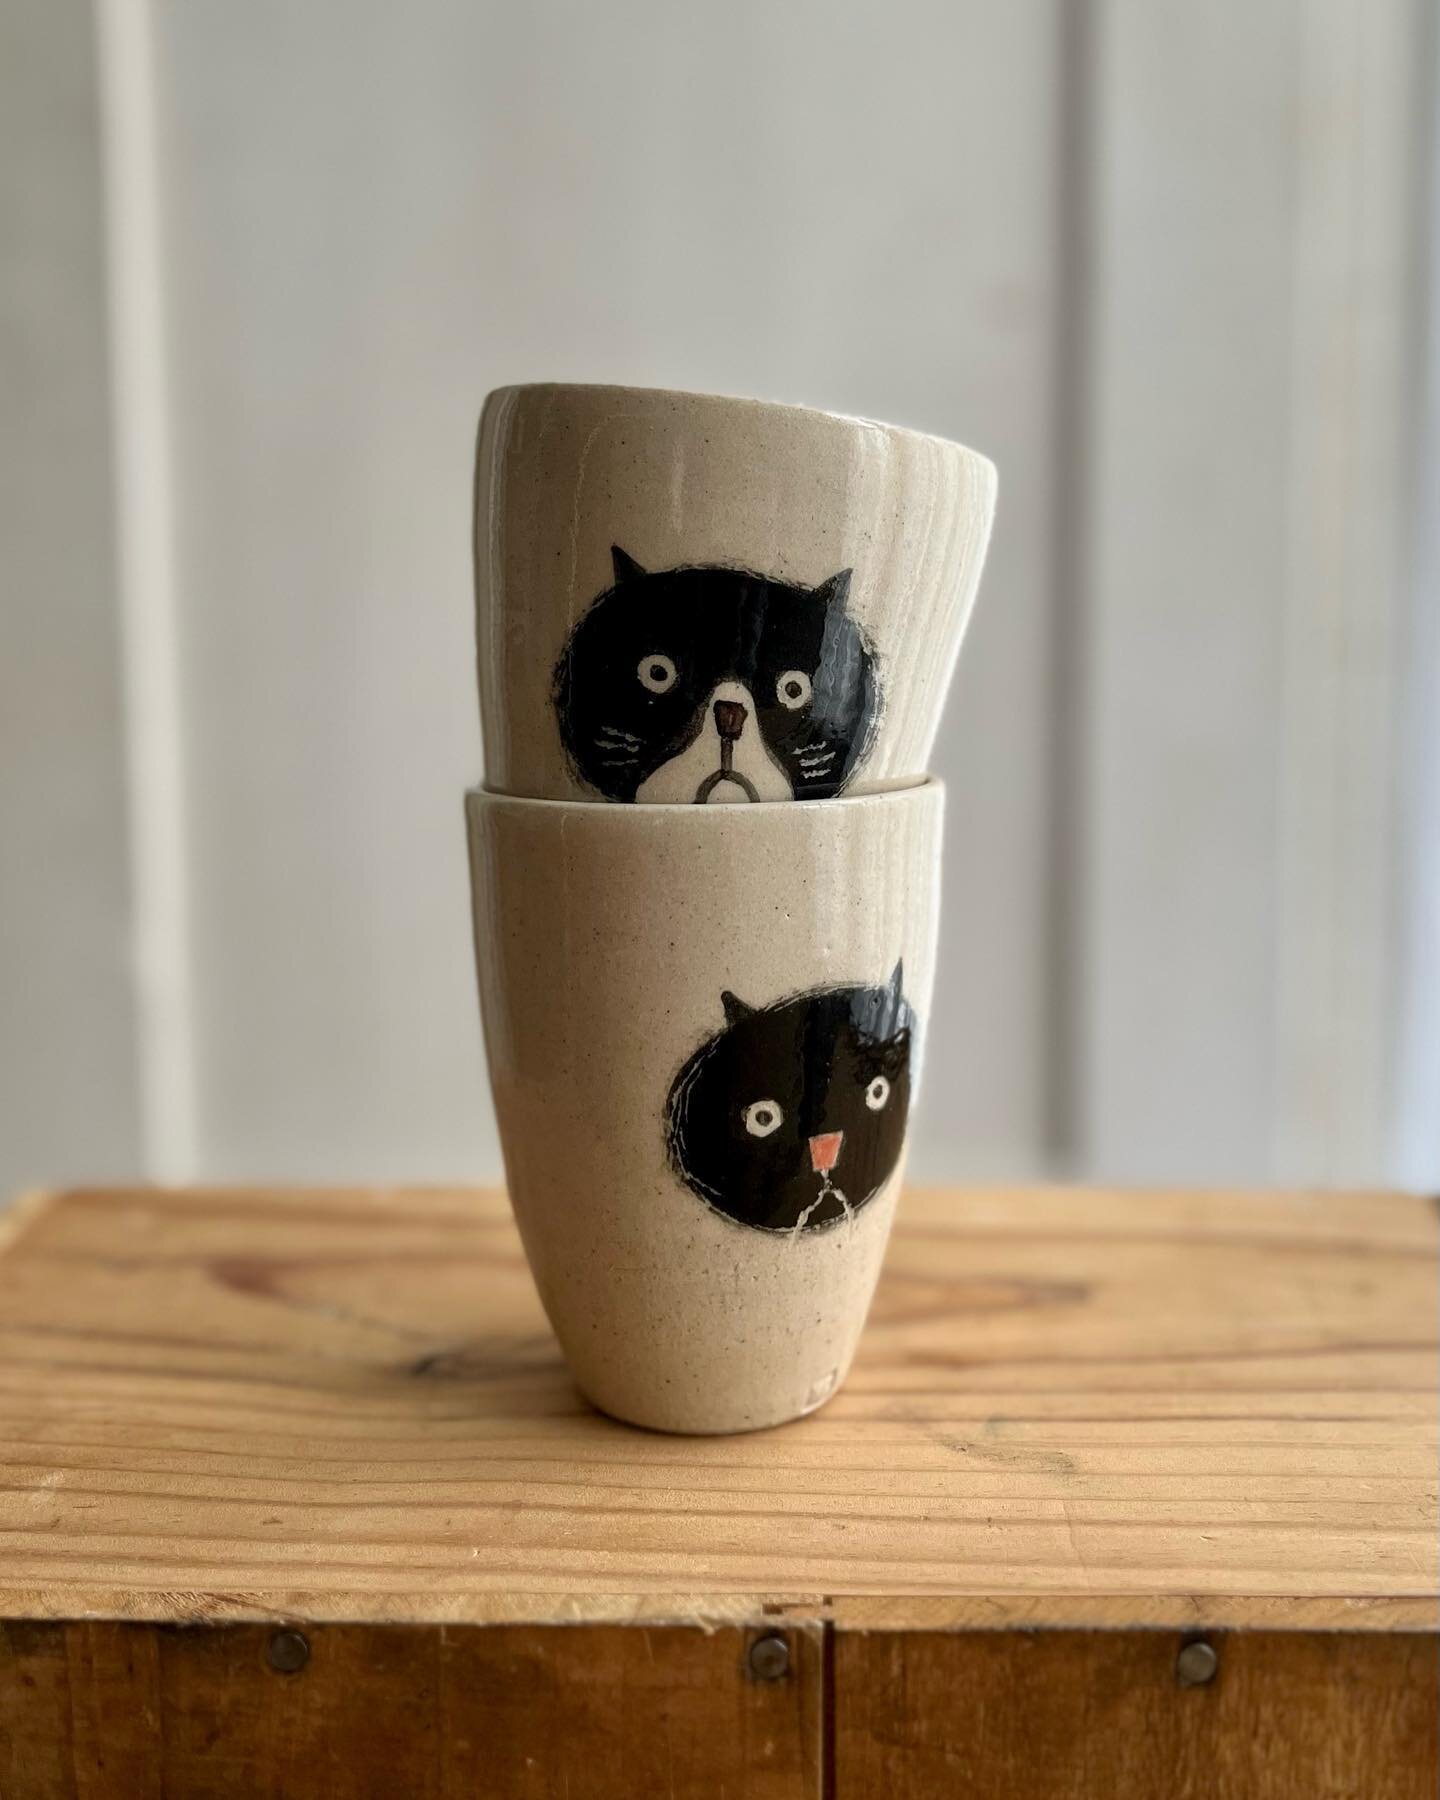 Do you remember the grumpy cat beer tumblers from last year? These are hand-painted by @francescastle, an illustrator who also runs a successful record label Clay Pipe. This collaboration project began three years ago. 
I'll be showcasing some of the